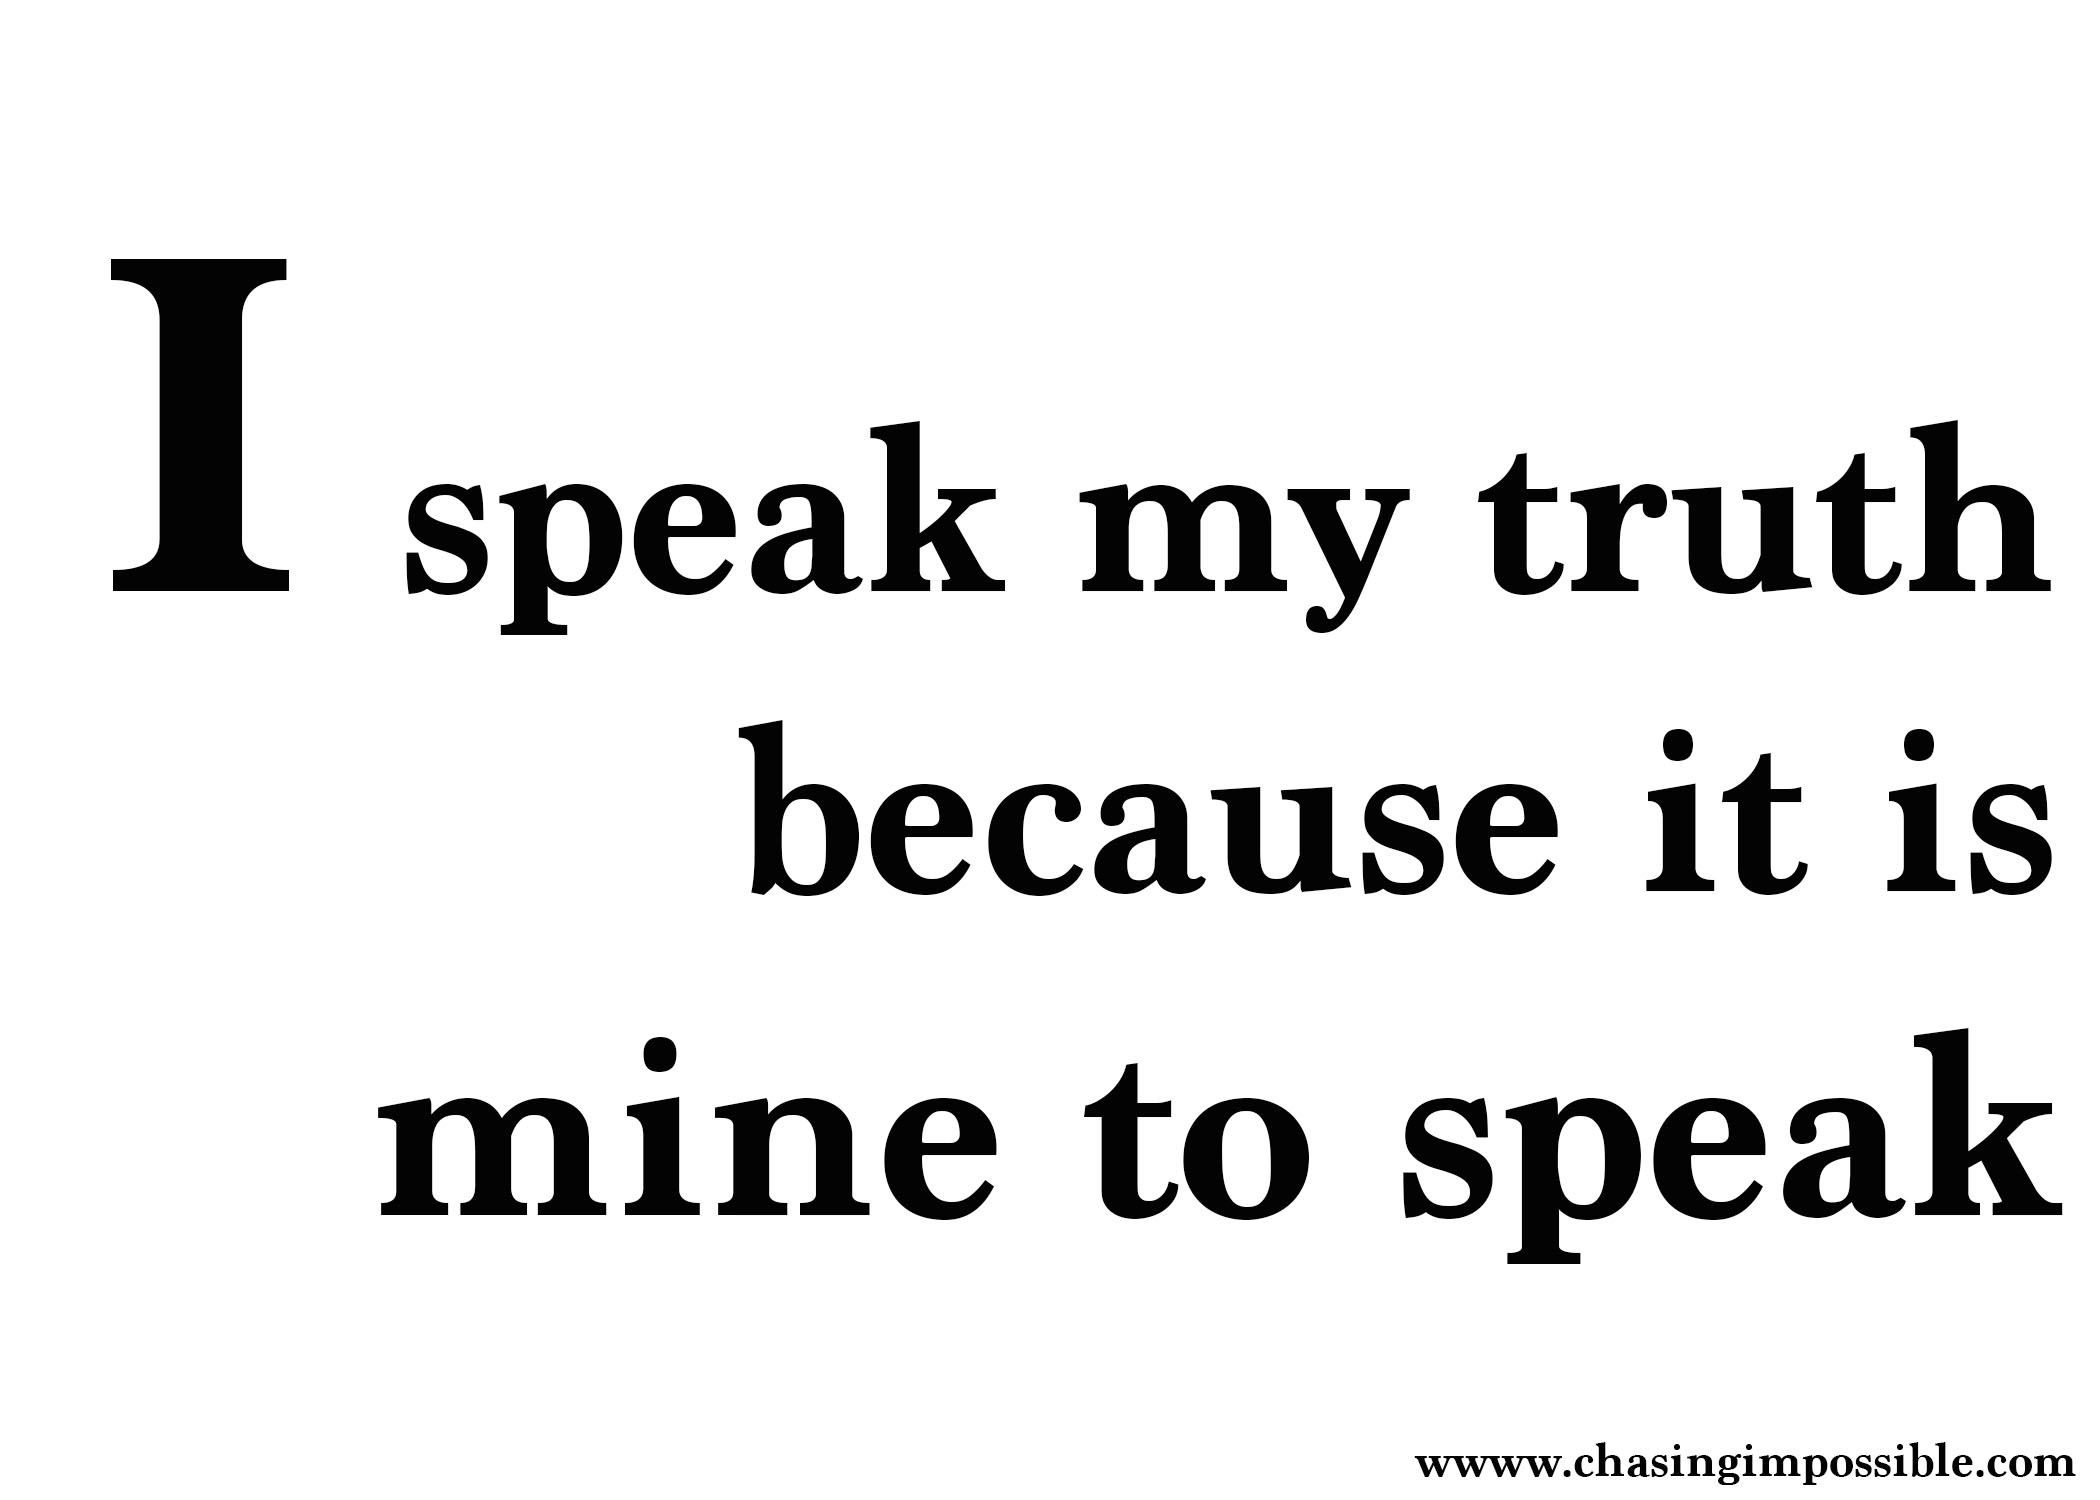 I speak my truth because it mine to speak and no other person's.